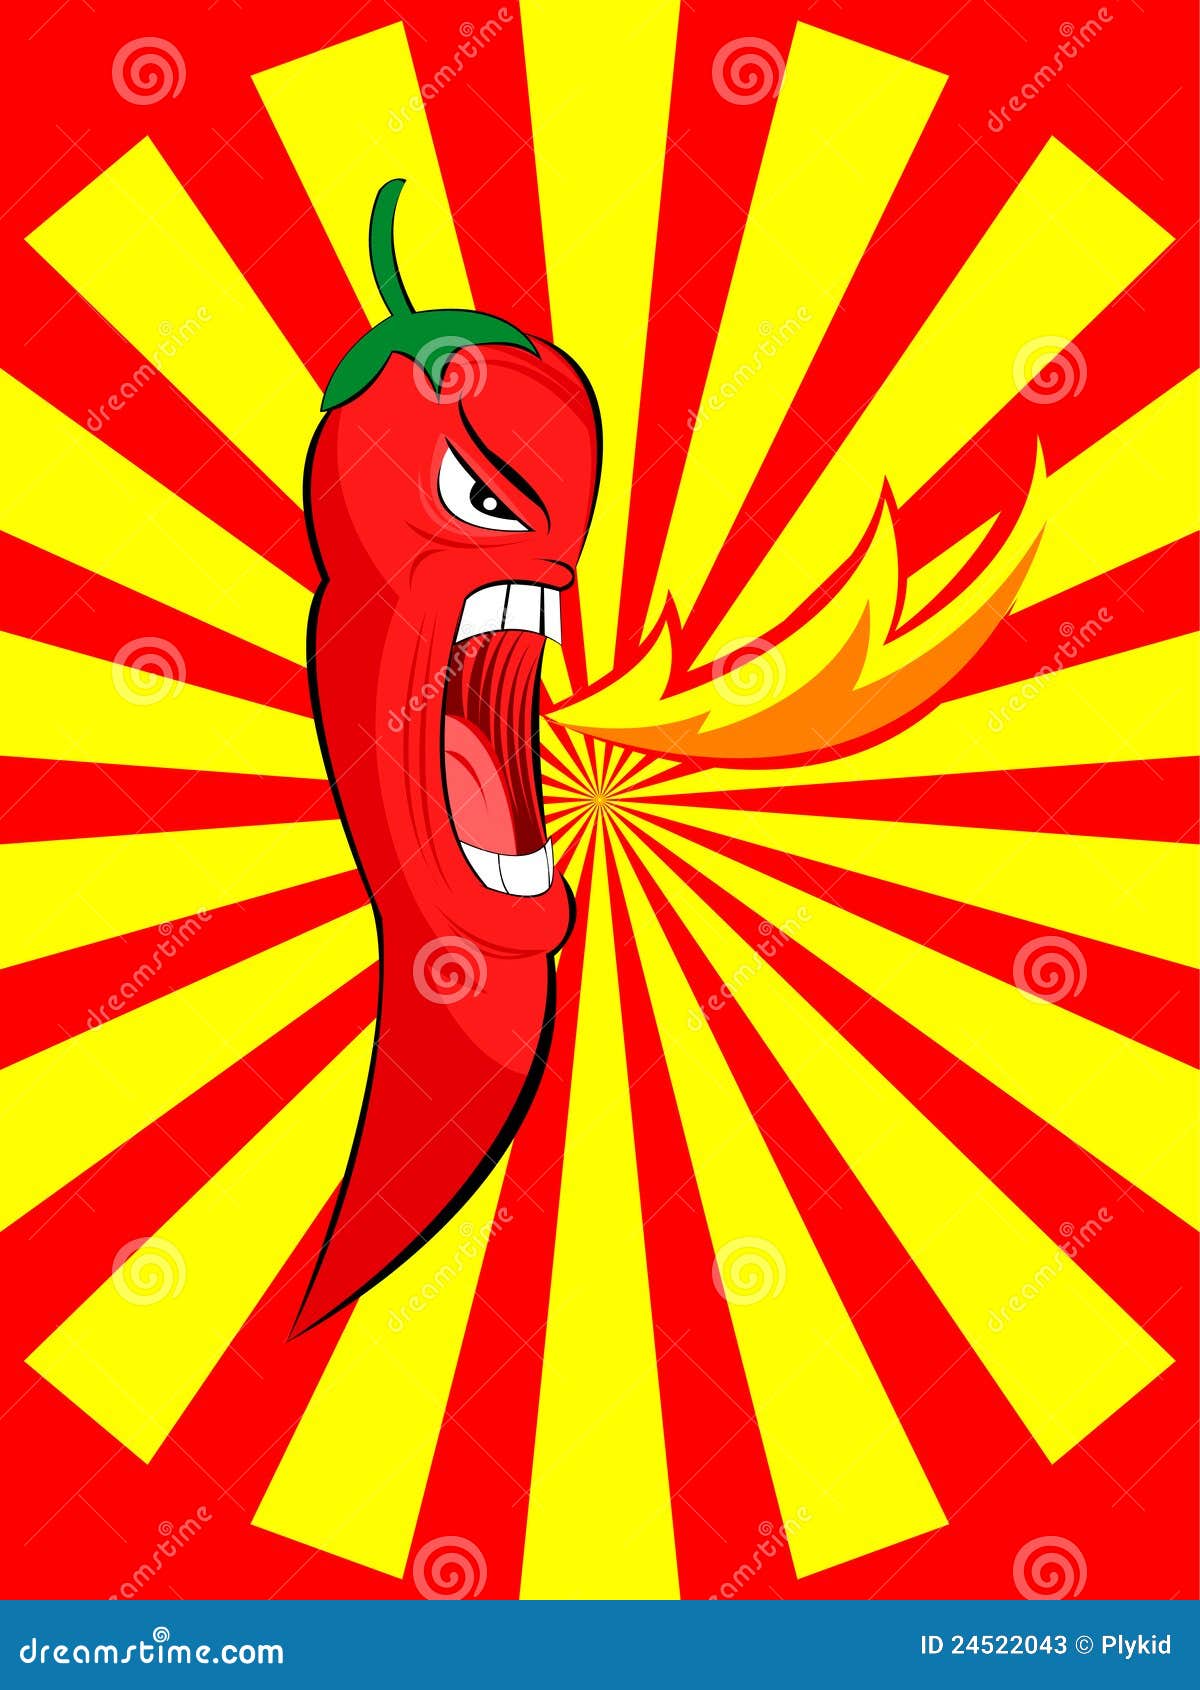 angry red chili spurt fire